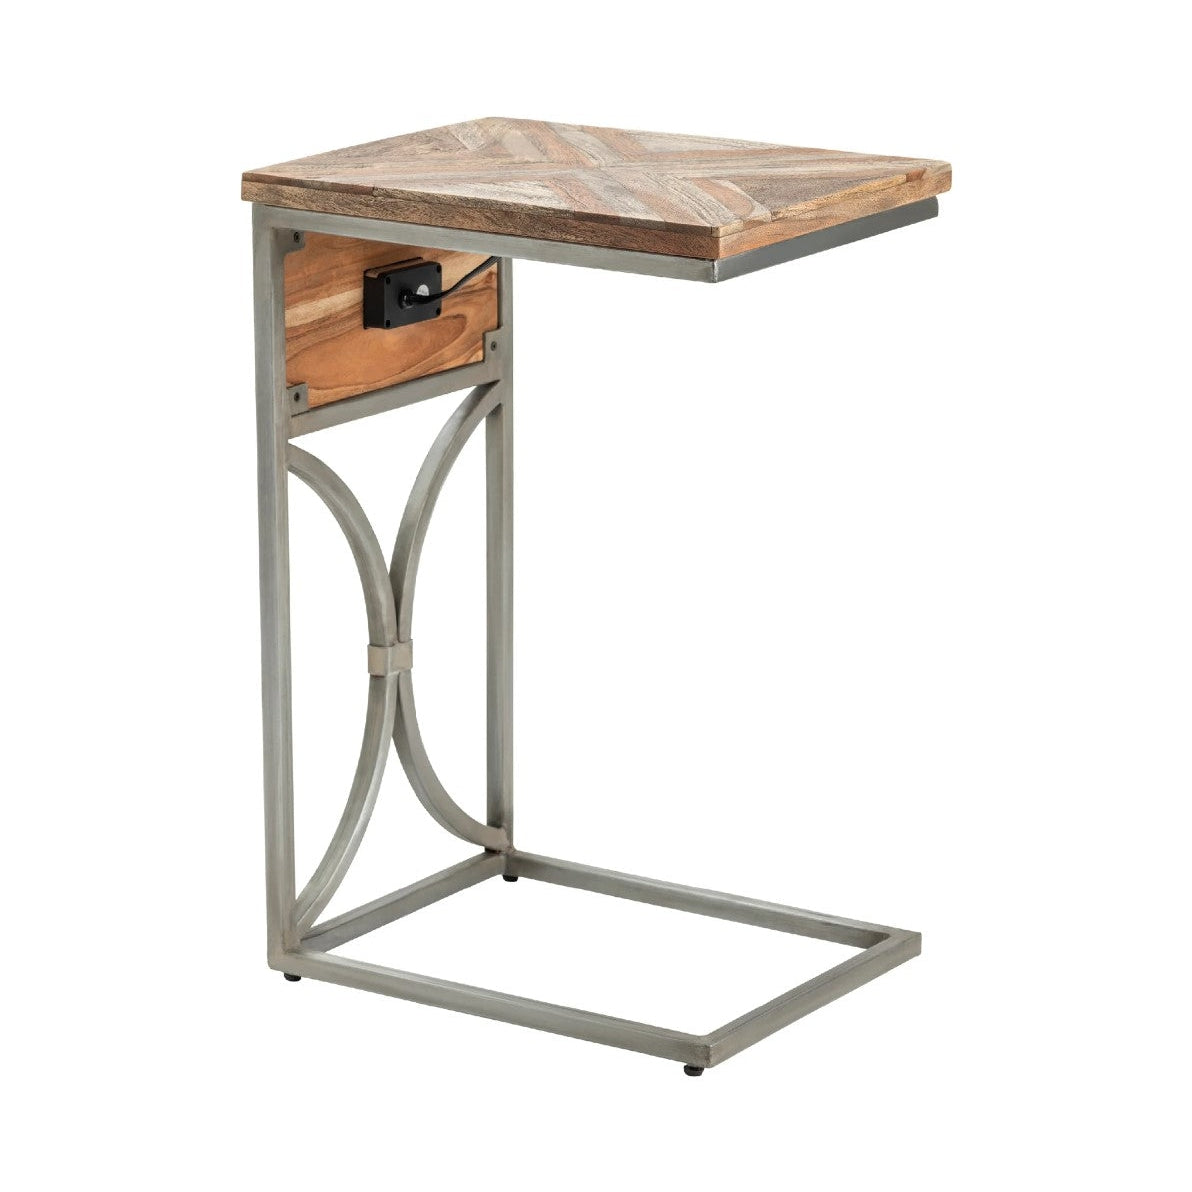 Crestview Collection Bengal Manor 14" x 18" x 25" Rustic Acacia Wood And Metal C Side Table with USB Power In Natural Finish